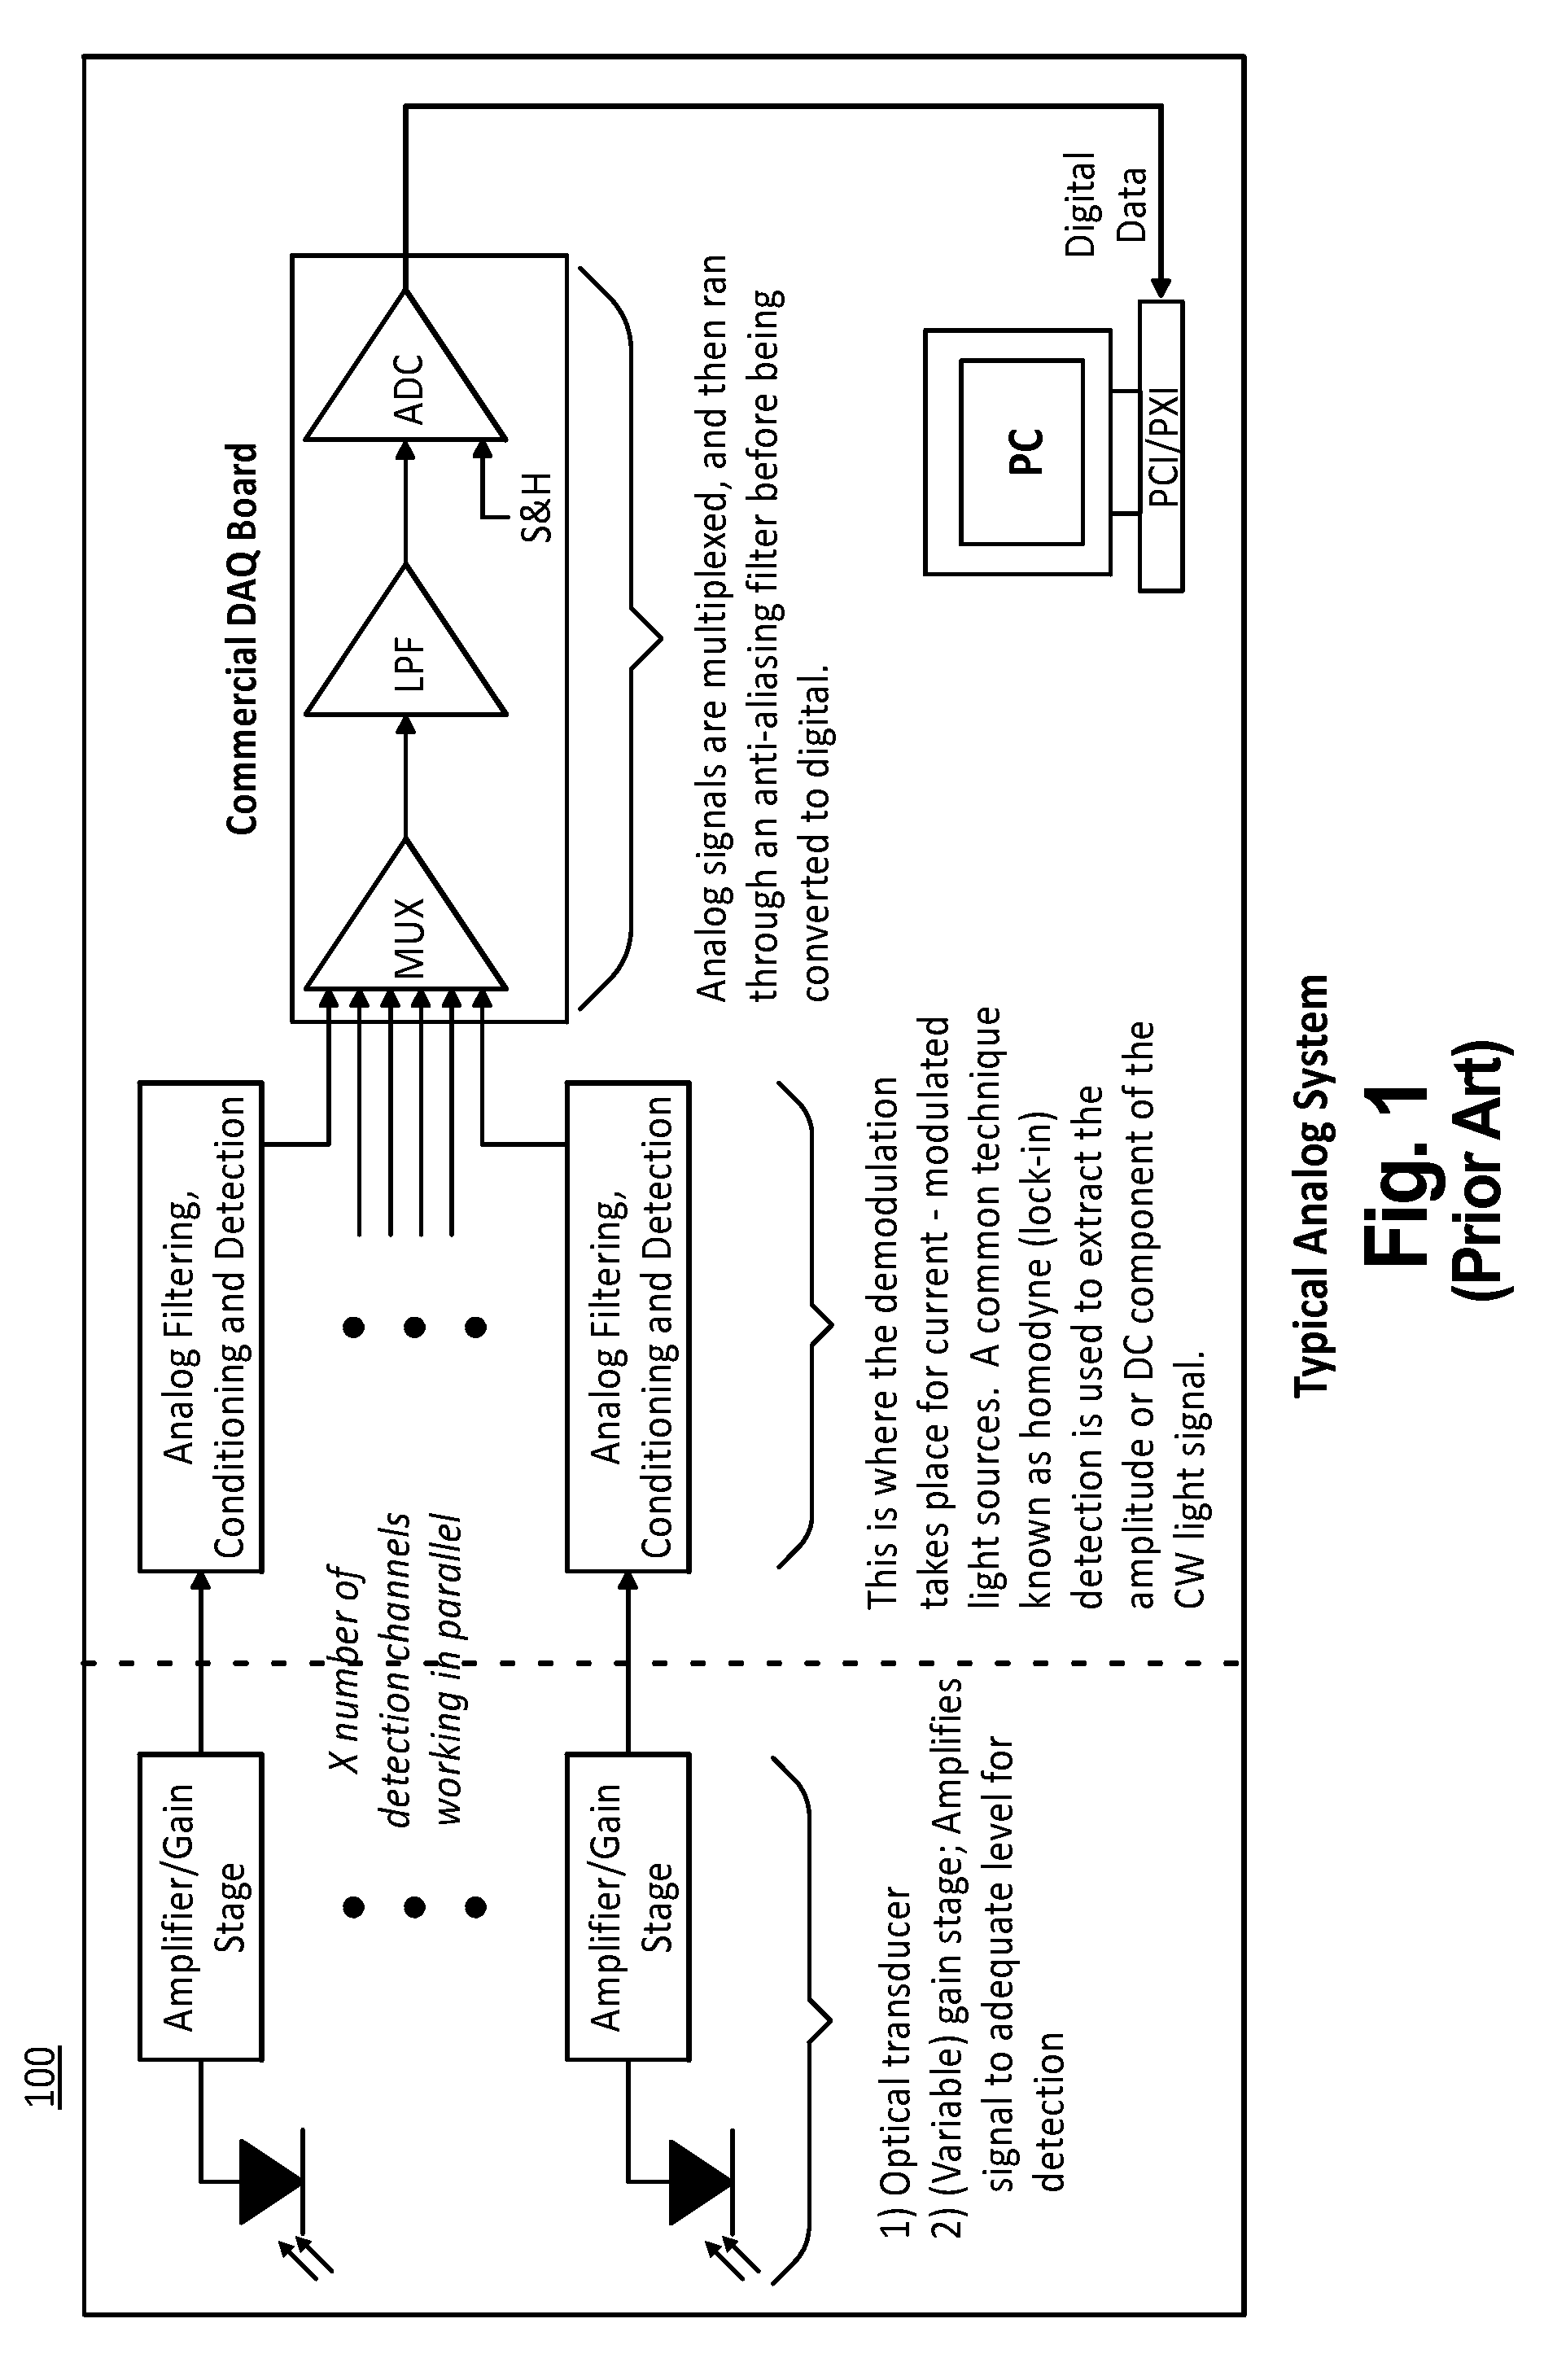 Digital signal processor-based detection system, method, and apparatus for optical tomography